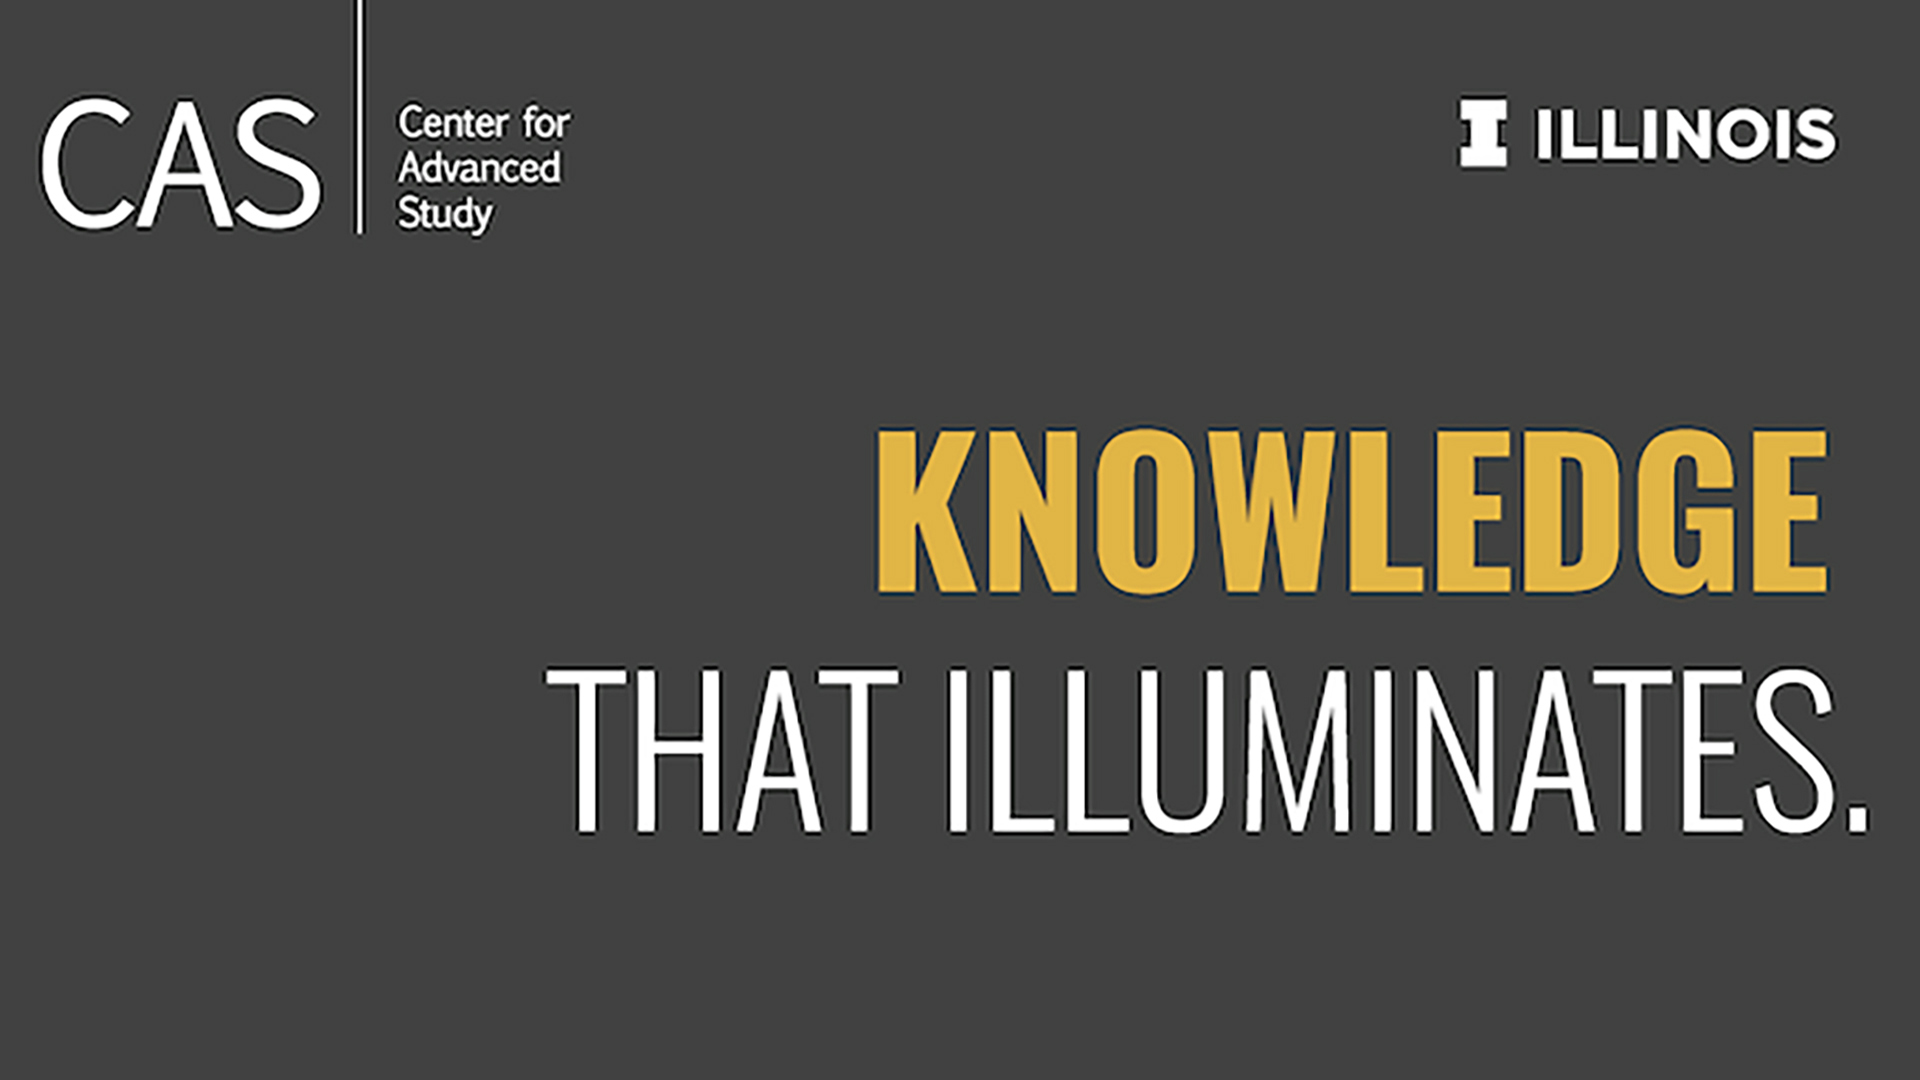 Center for Advanced Study Banner that reads "Knowledge That Illuminates"